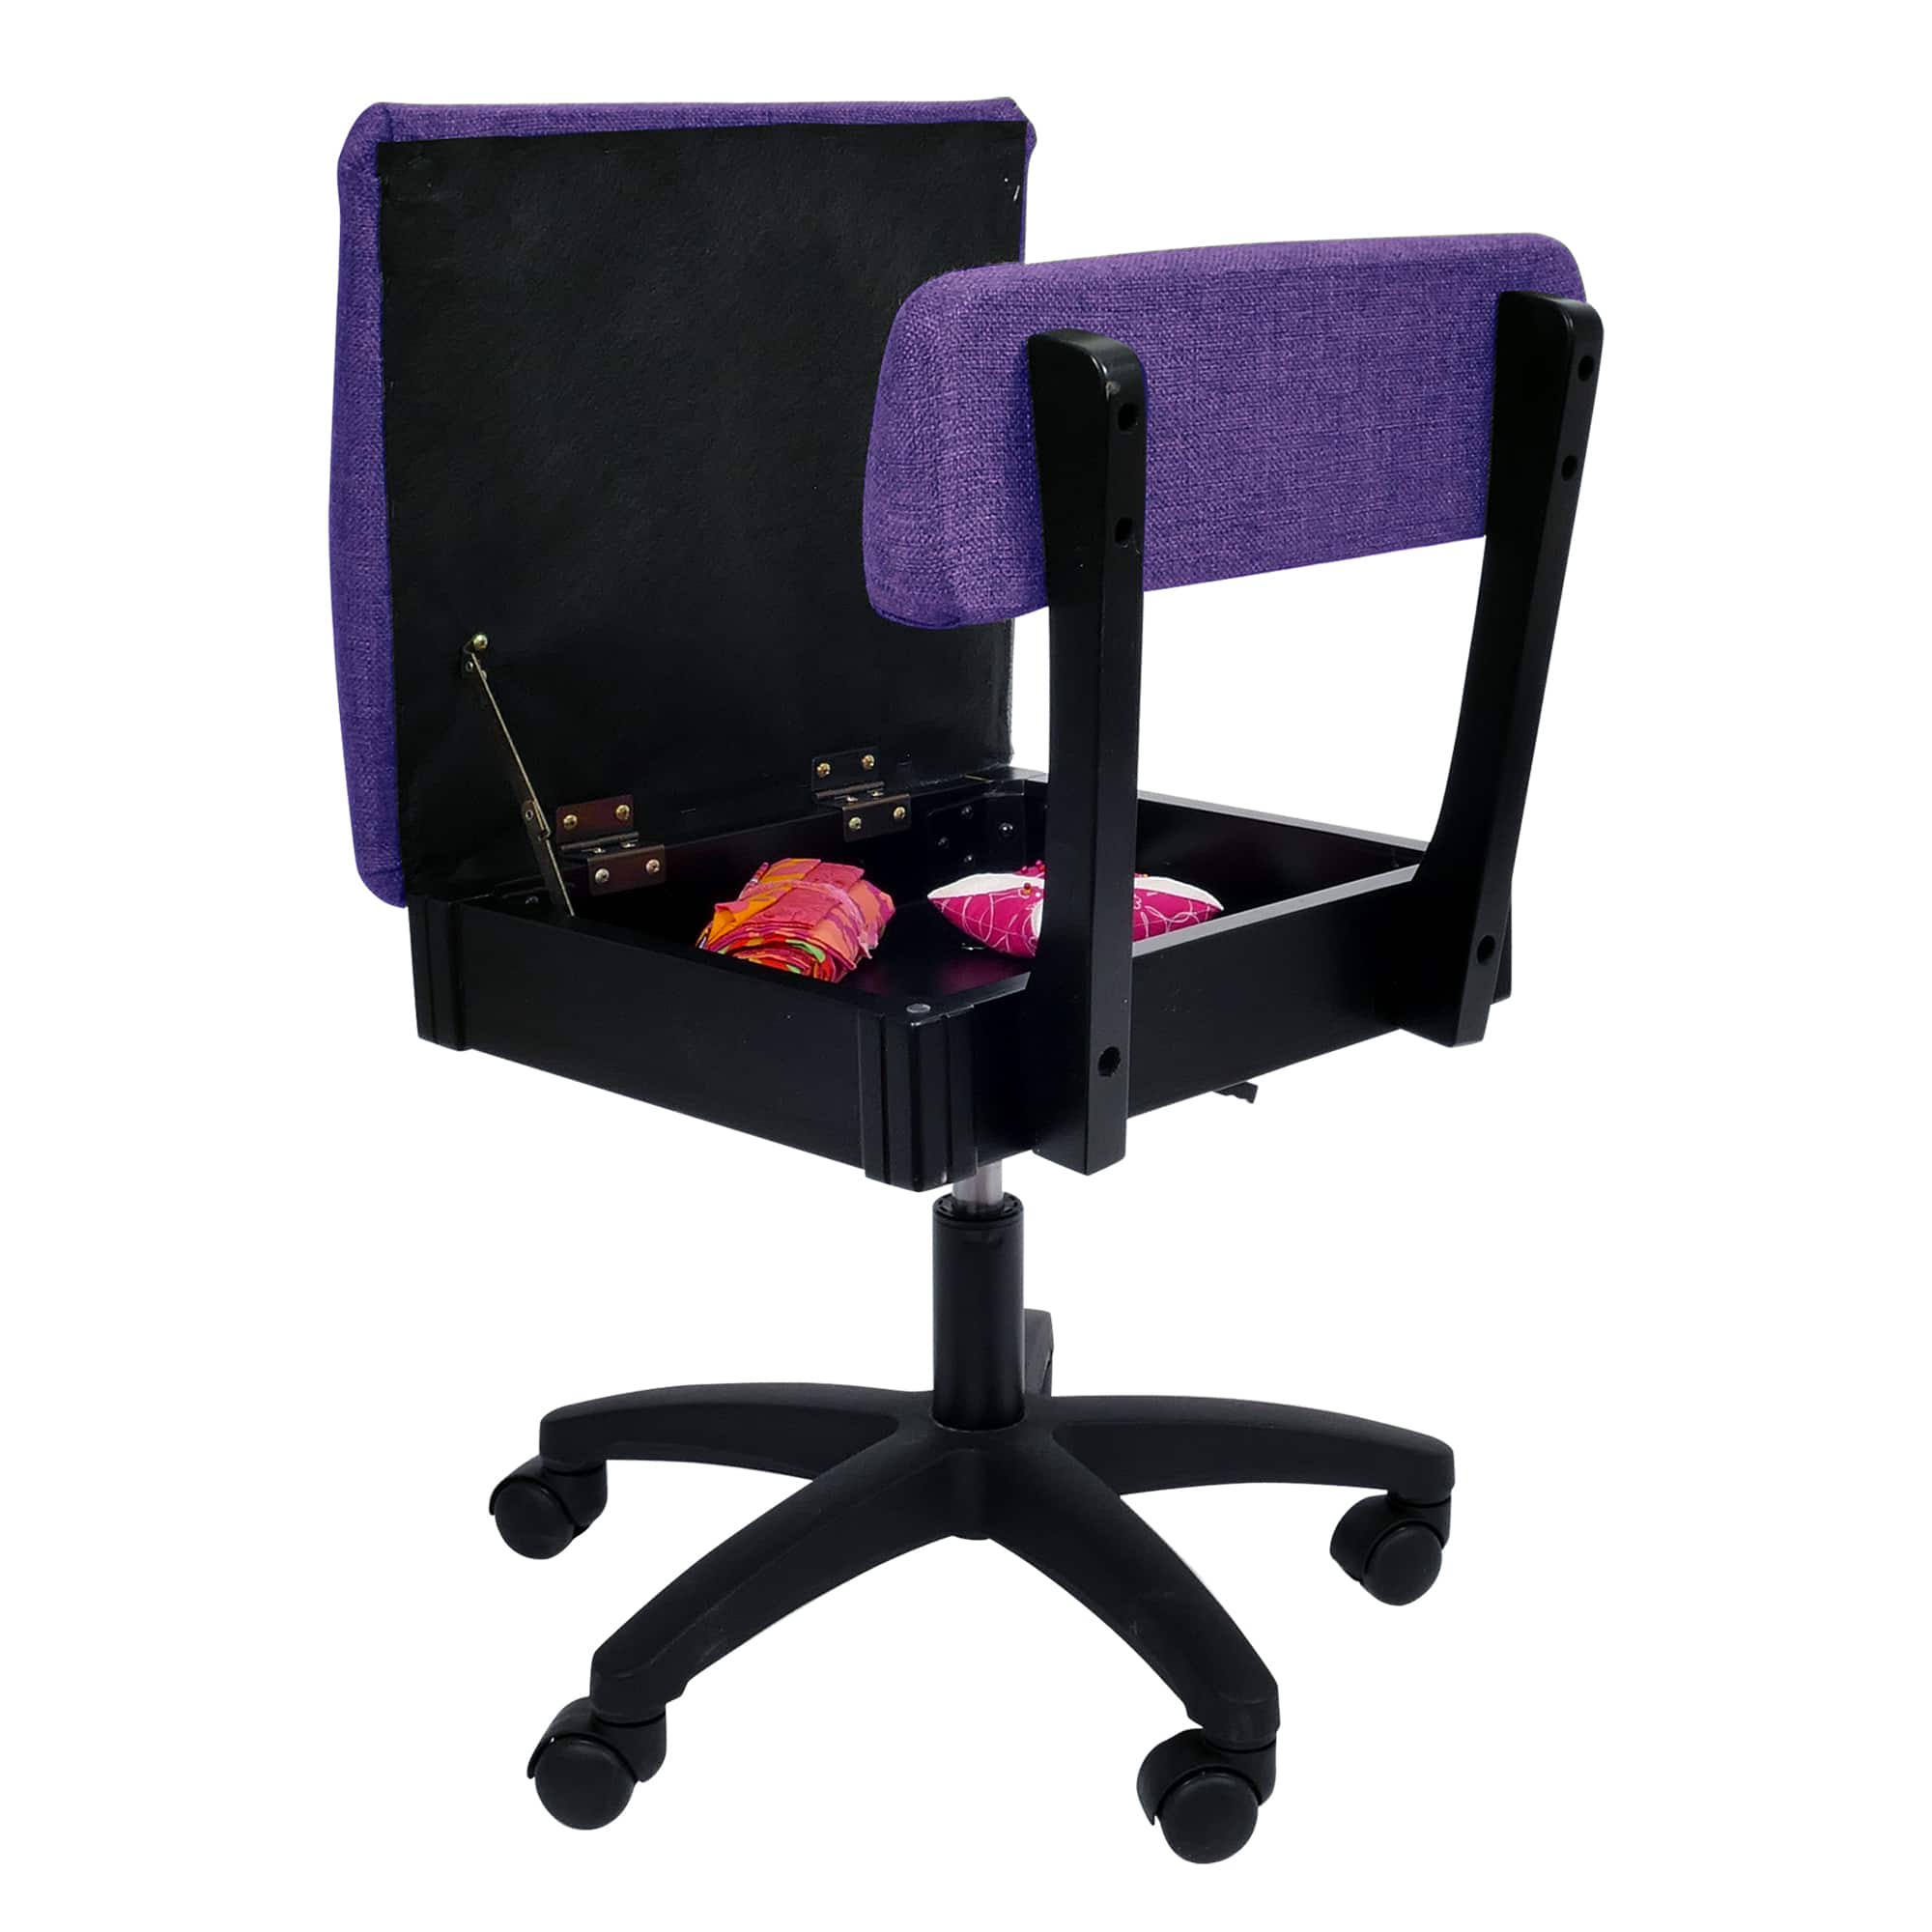 Royal Purple Sewing Chair (H8160) from Arrow Sewing Furniture with seat open